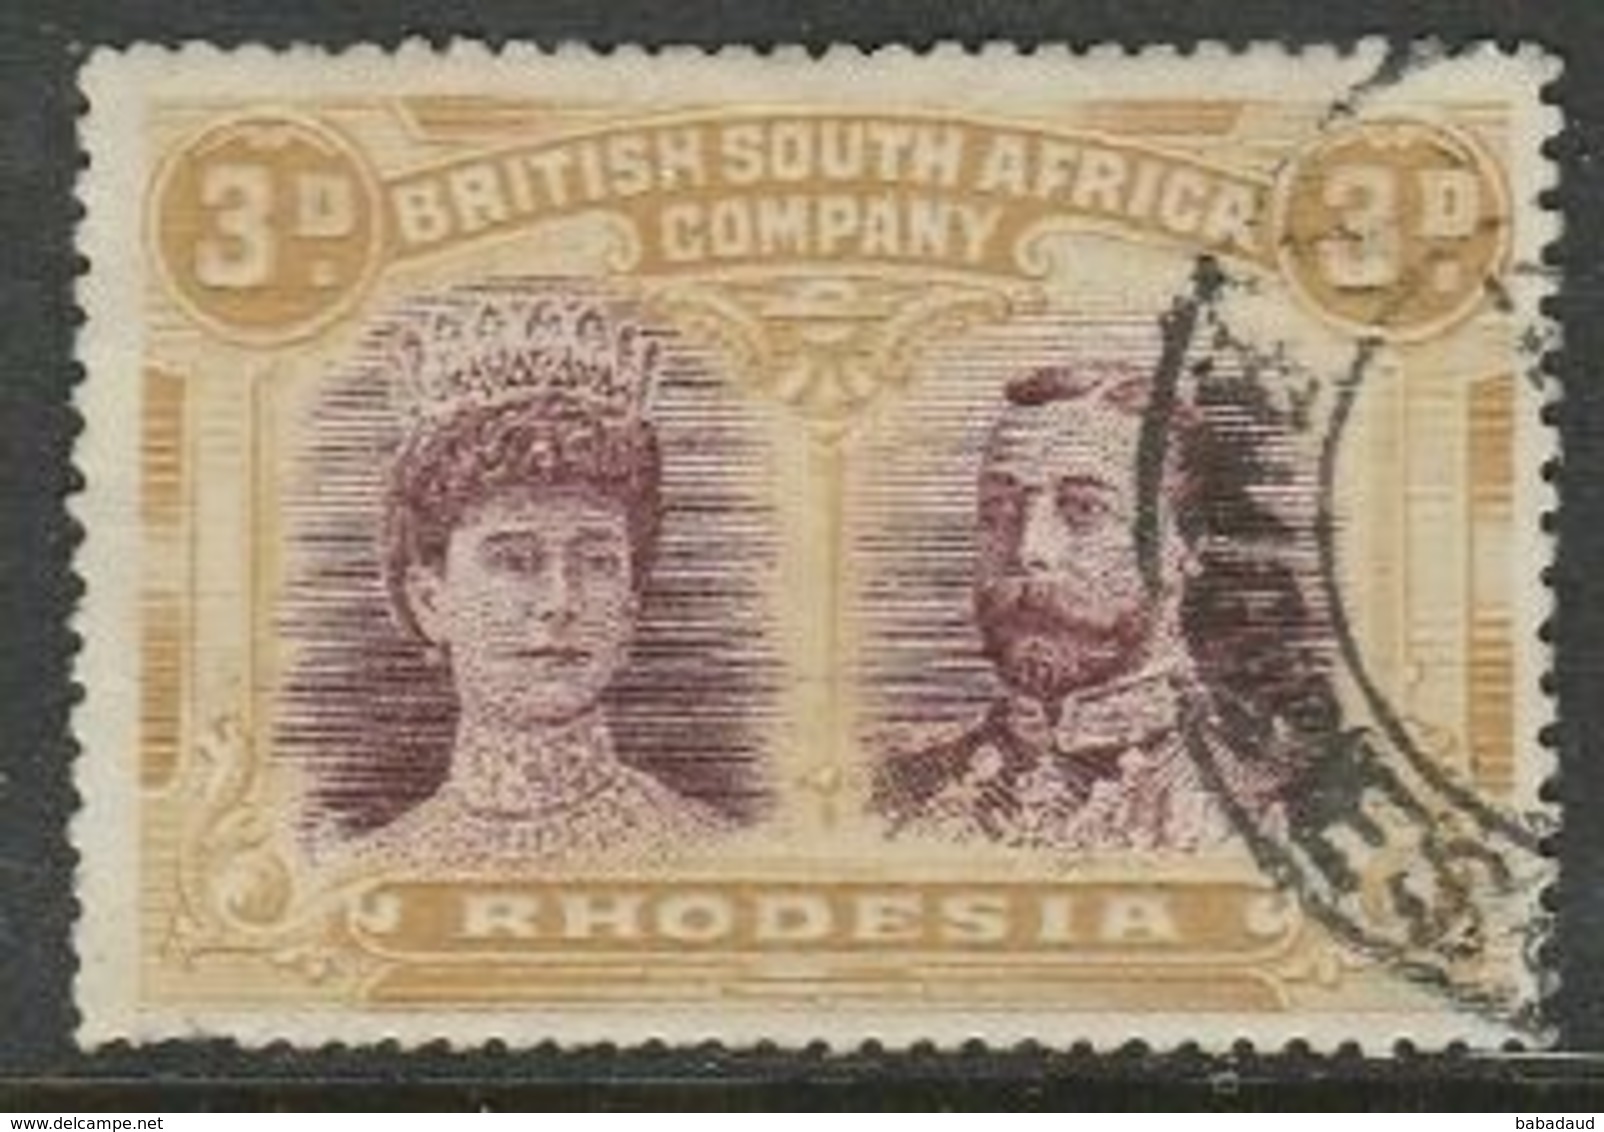 S.Rhodesia B.S.A.Co., 1910, Double Head, 4d Purple & Yellow, Perf 15, Used - Southern Rhodesia (...-1964)